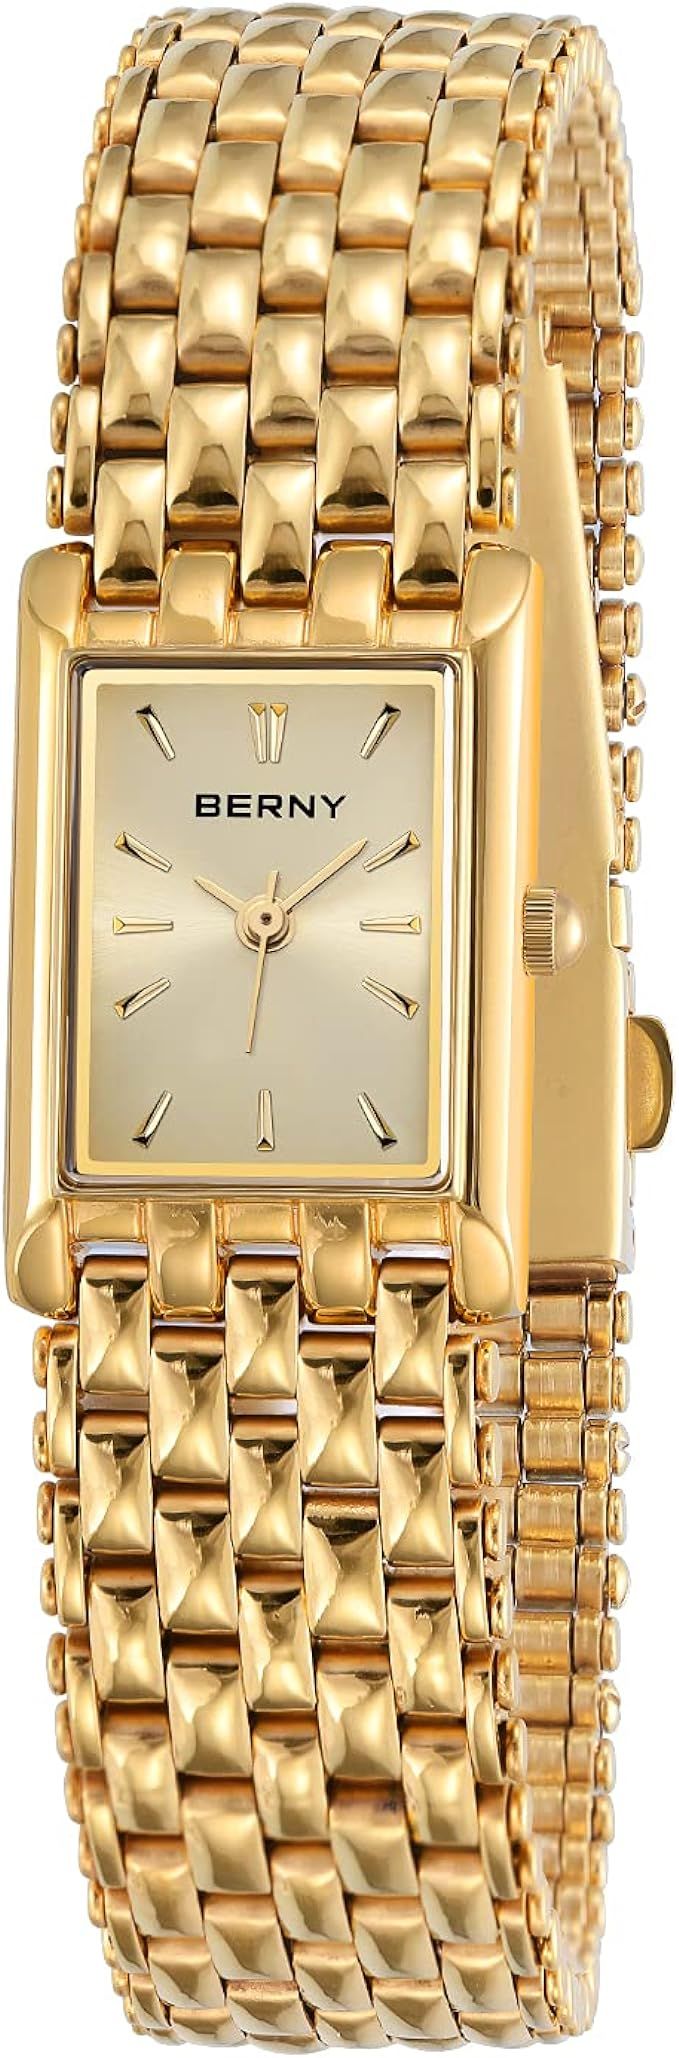 BERNY Gold Watches for Women Updated Ladies Quartz Wrist Watches Stainless Steel Band Womens Smal... | Amazon (UK)